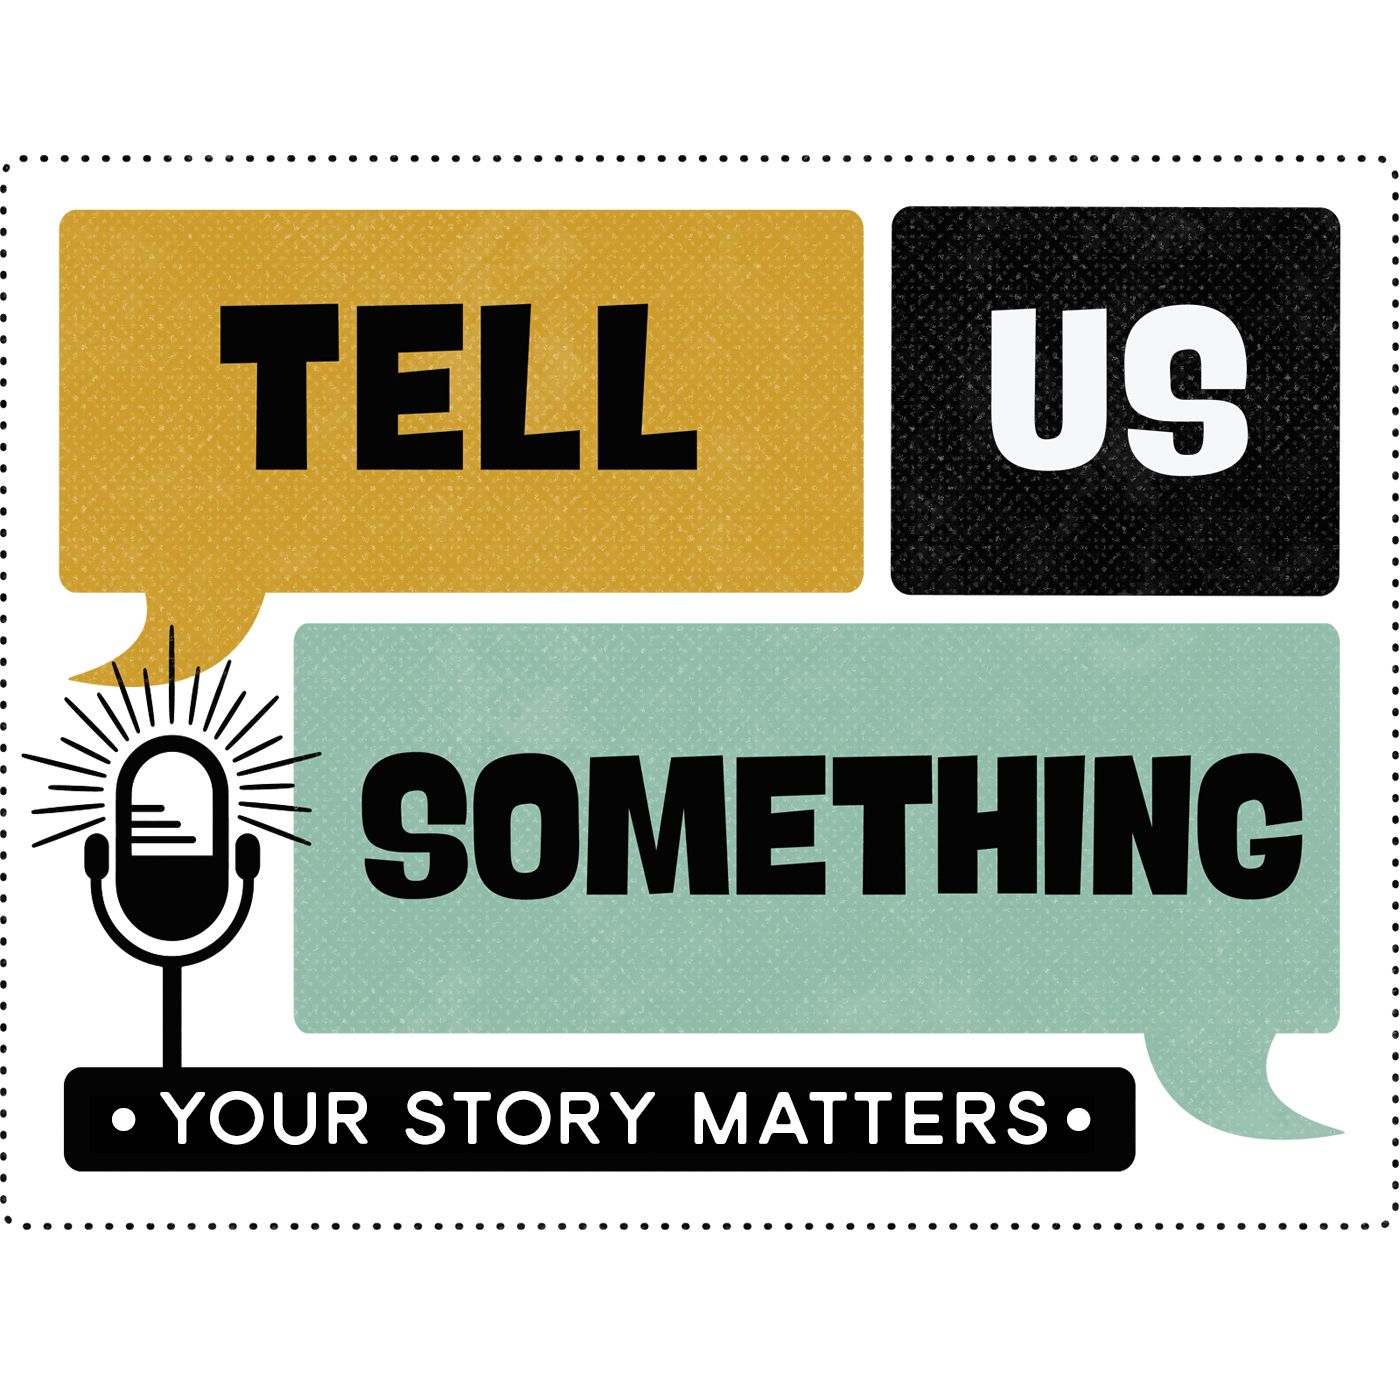 Tell Us Something A Celebration of Storytelling, Community and Each Other image